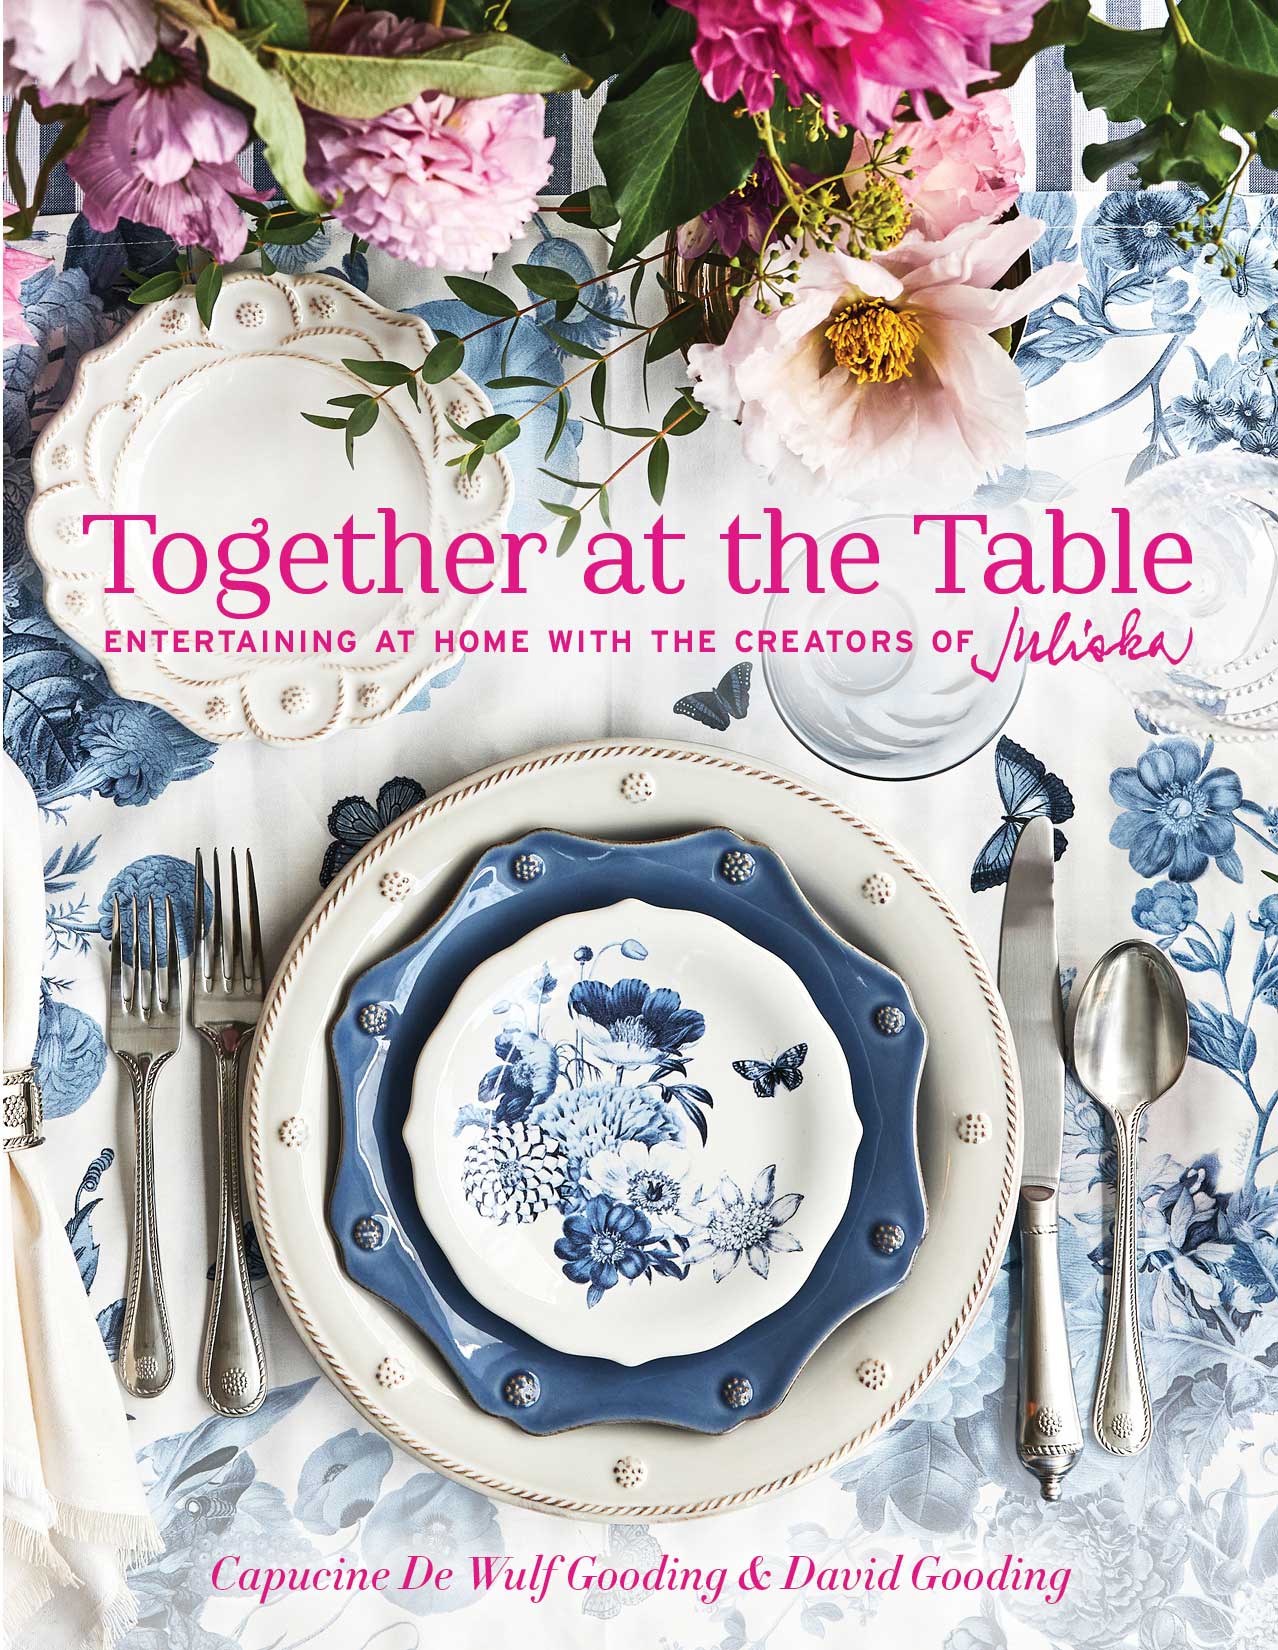 Together at the Table book cover